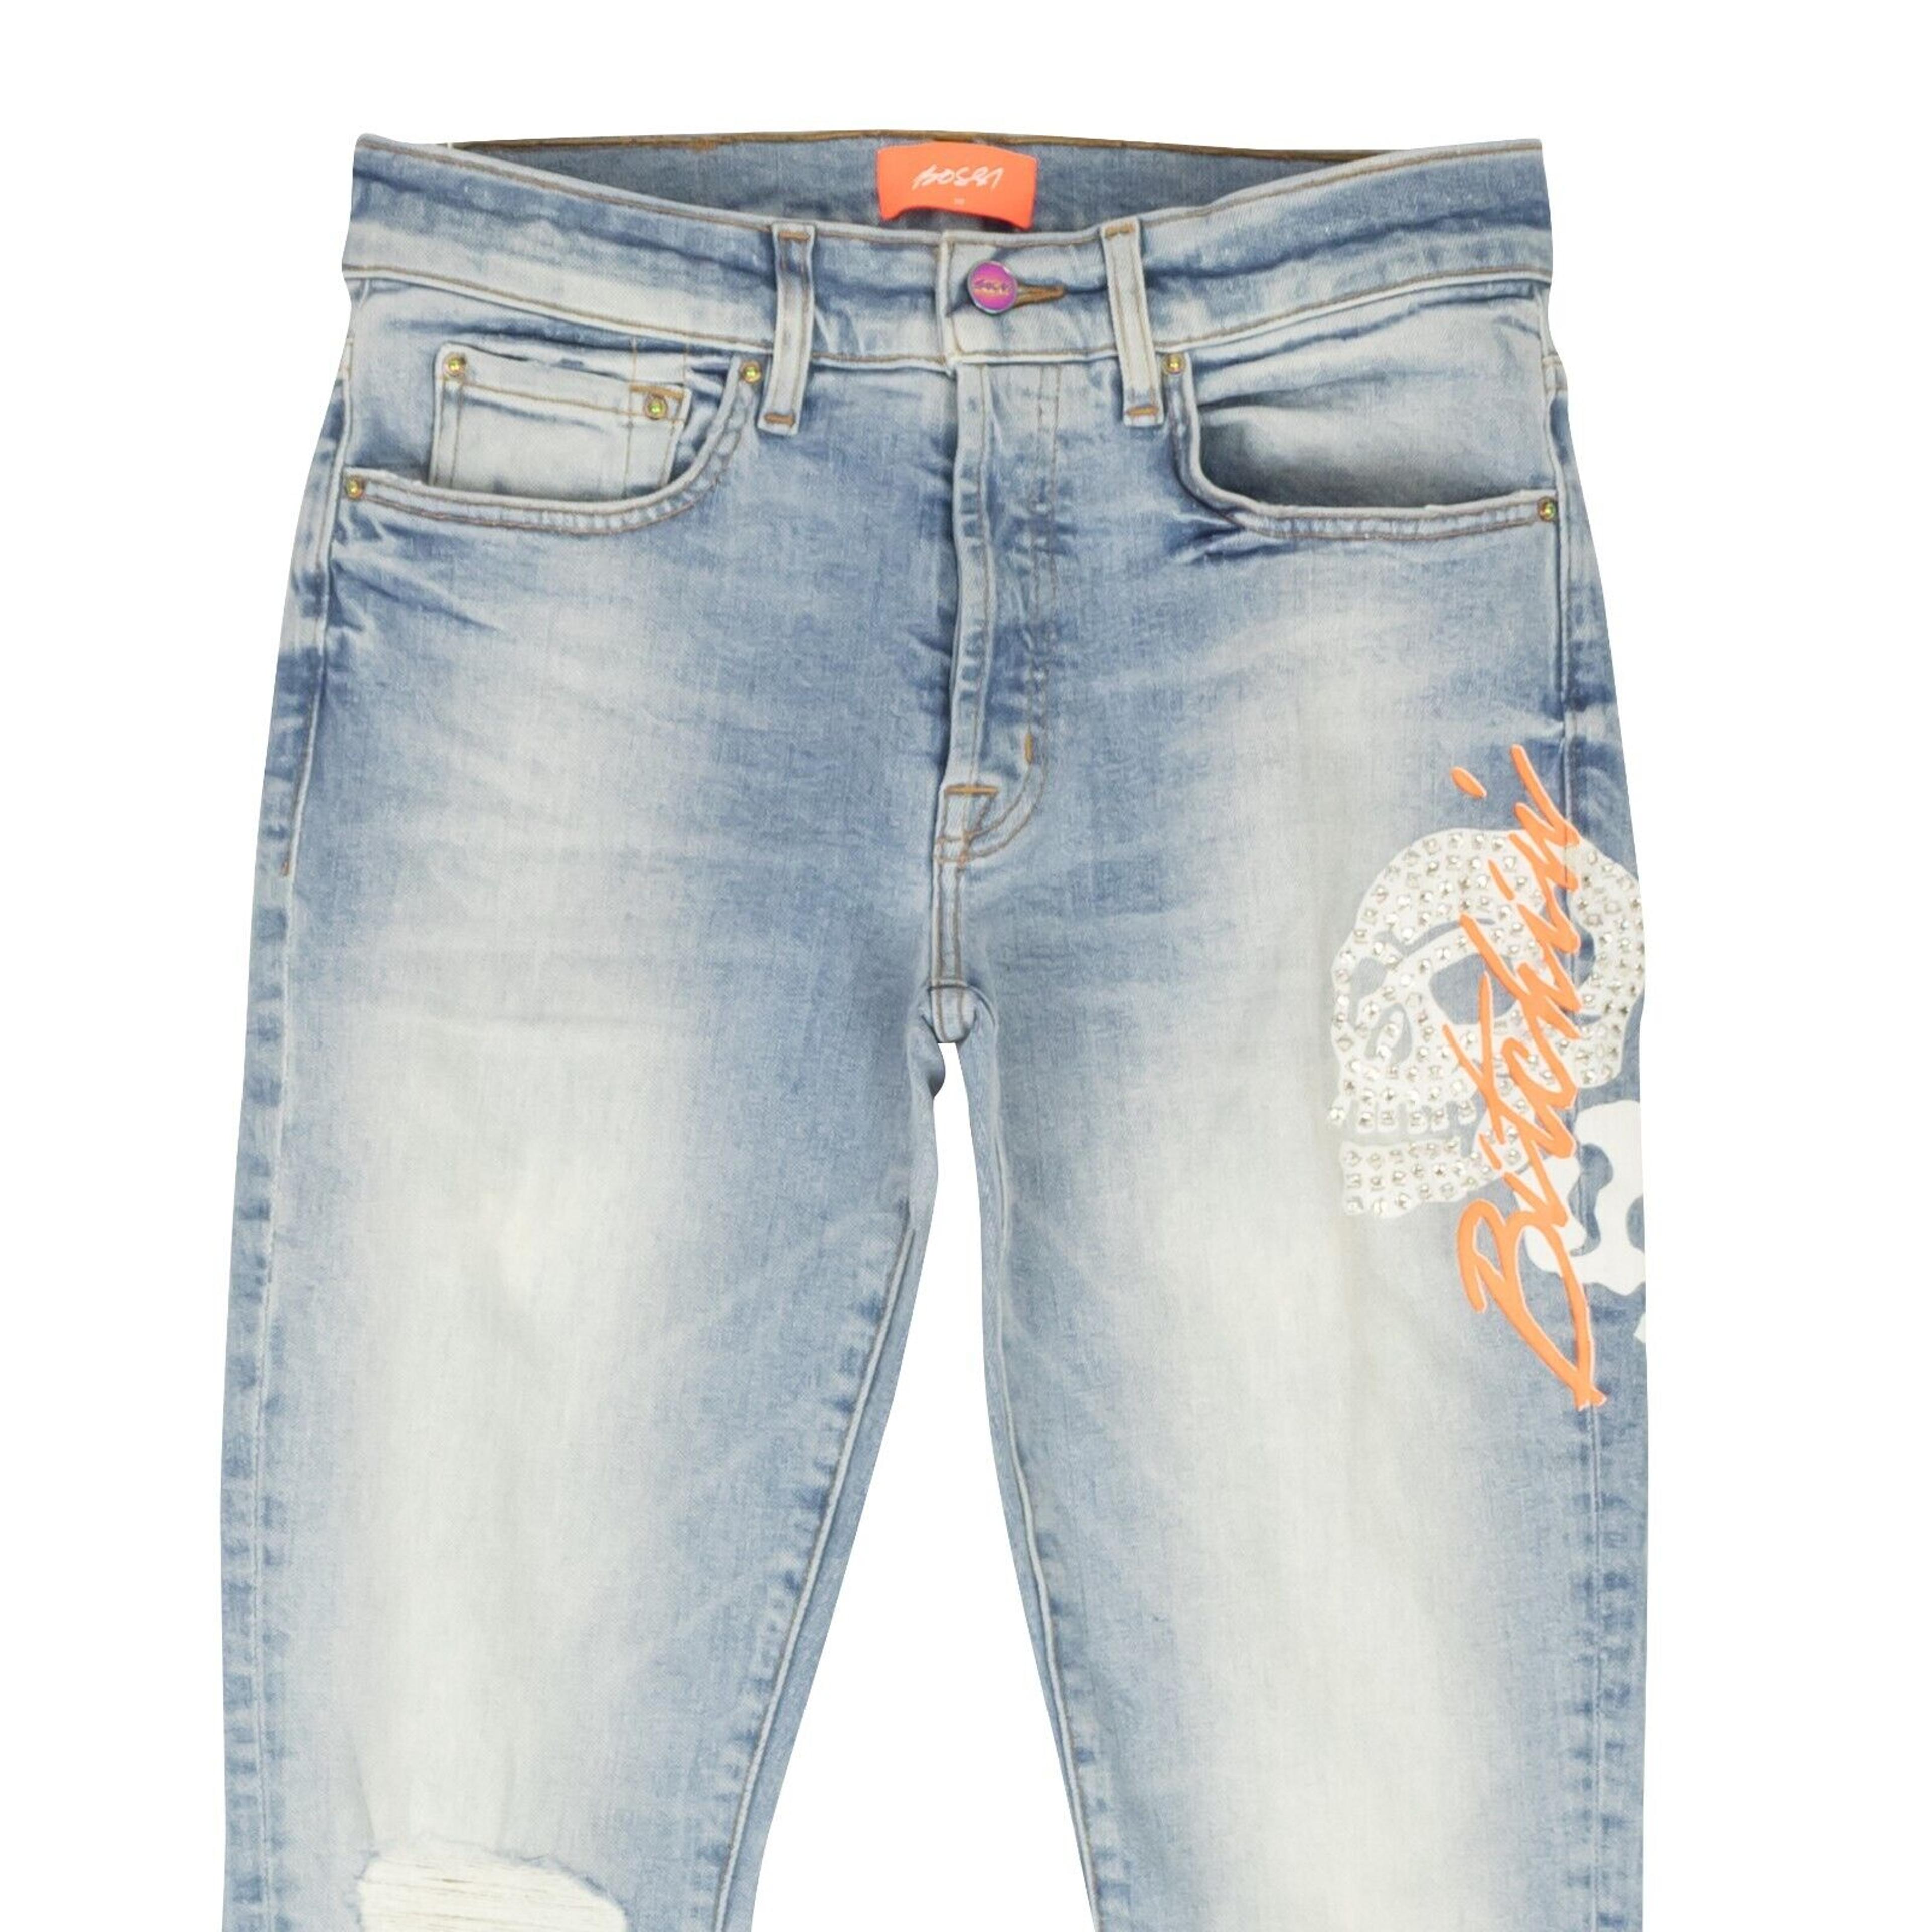 Alternate View 1 of Blue Cotton Embroidered Logo Slim-Fit Jeans